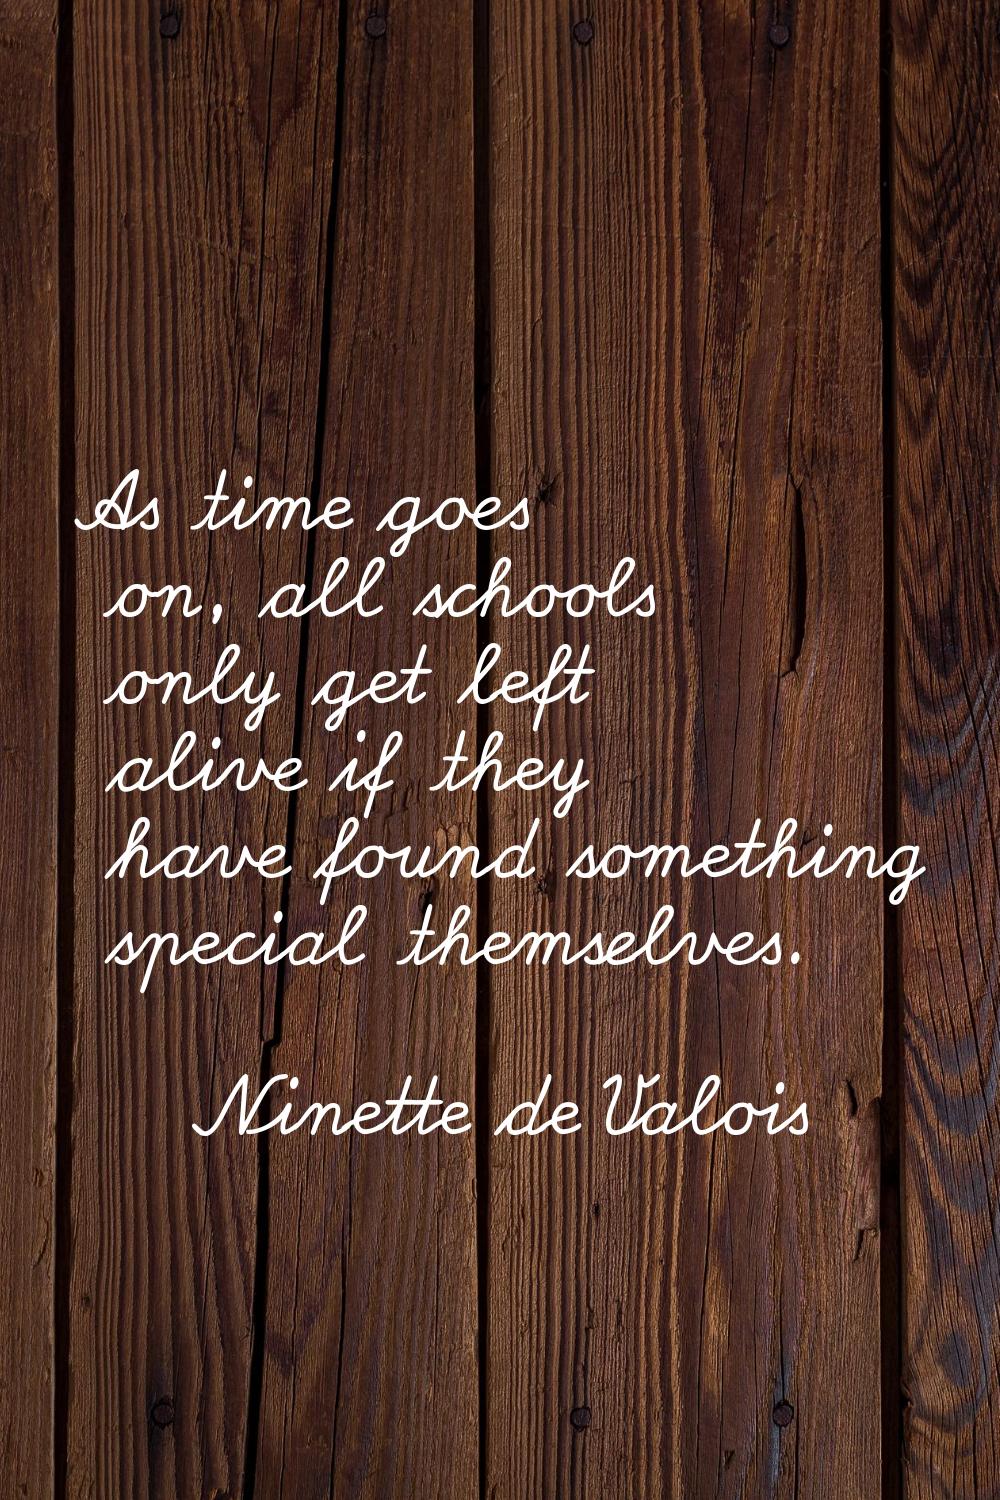 As time goes on, all schools only get left alive if they have found something special themselves.